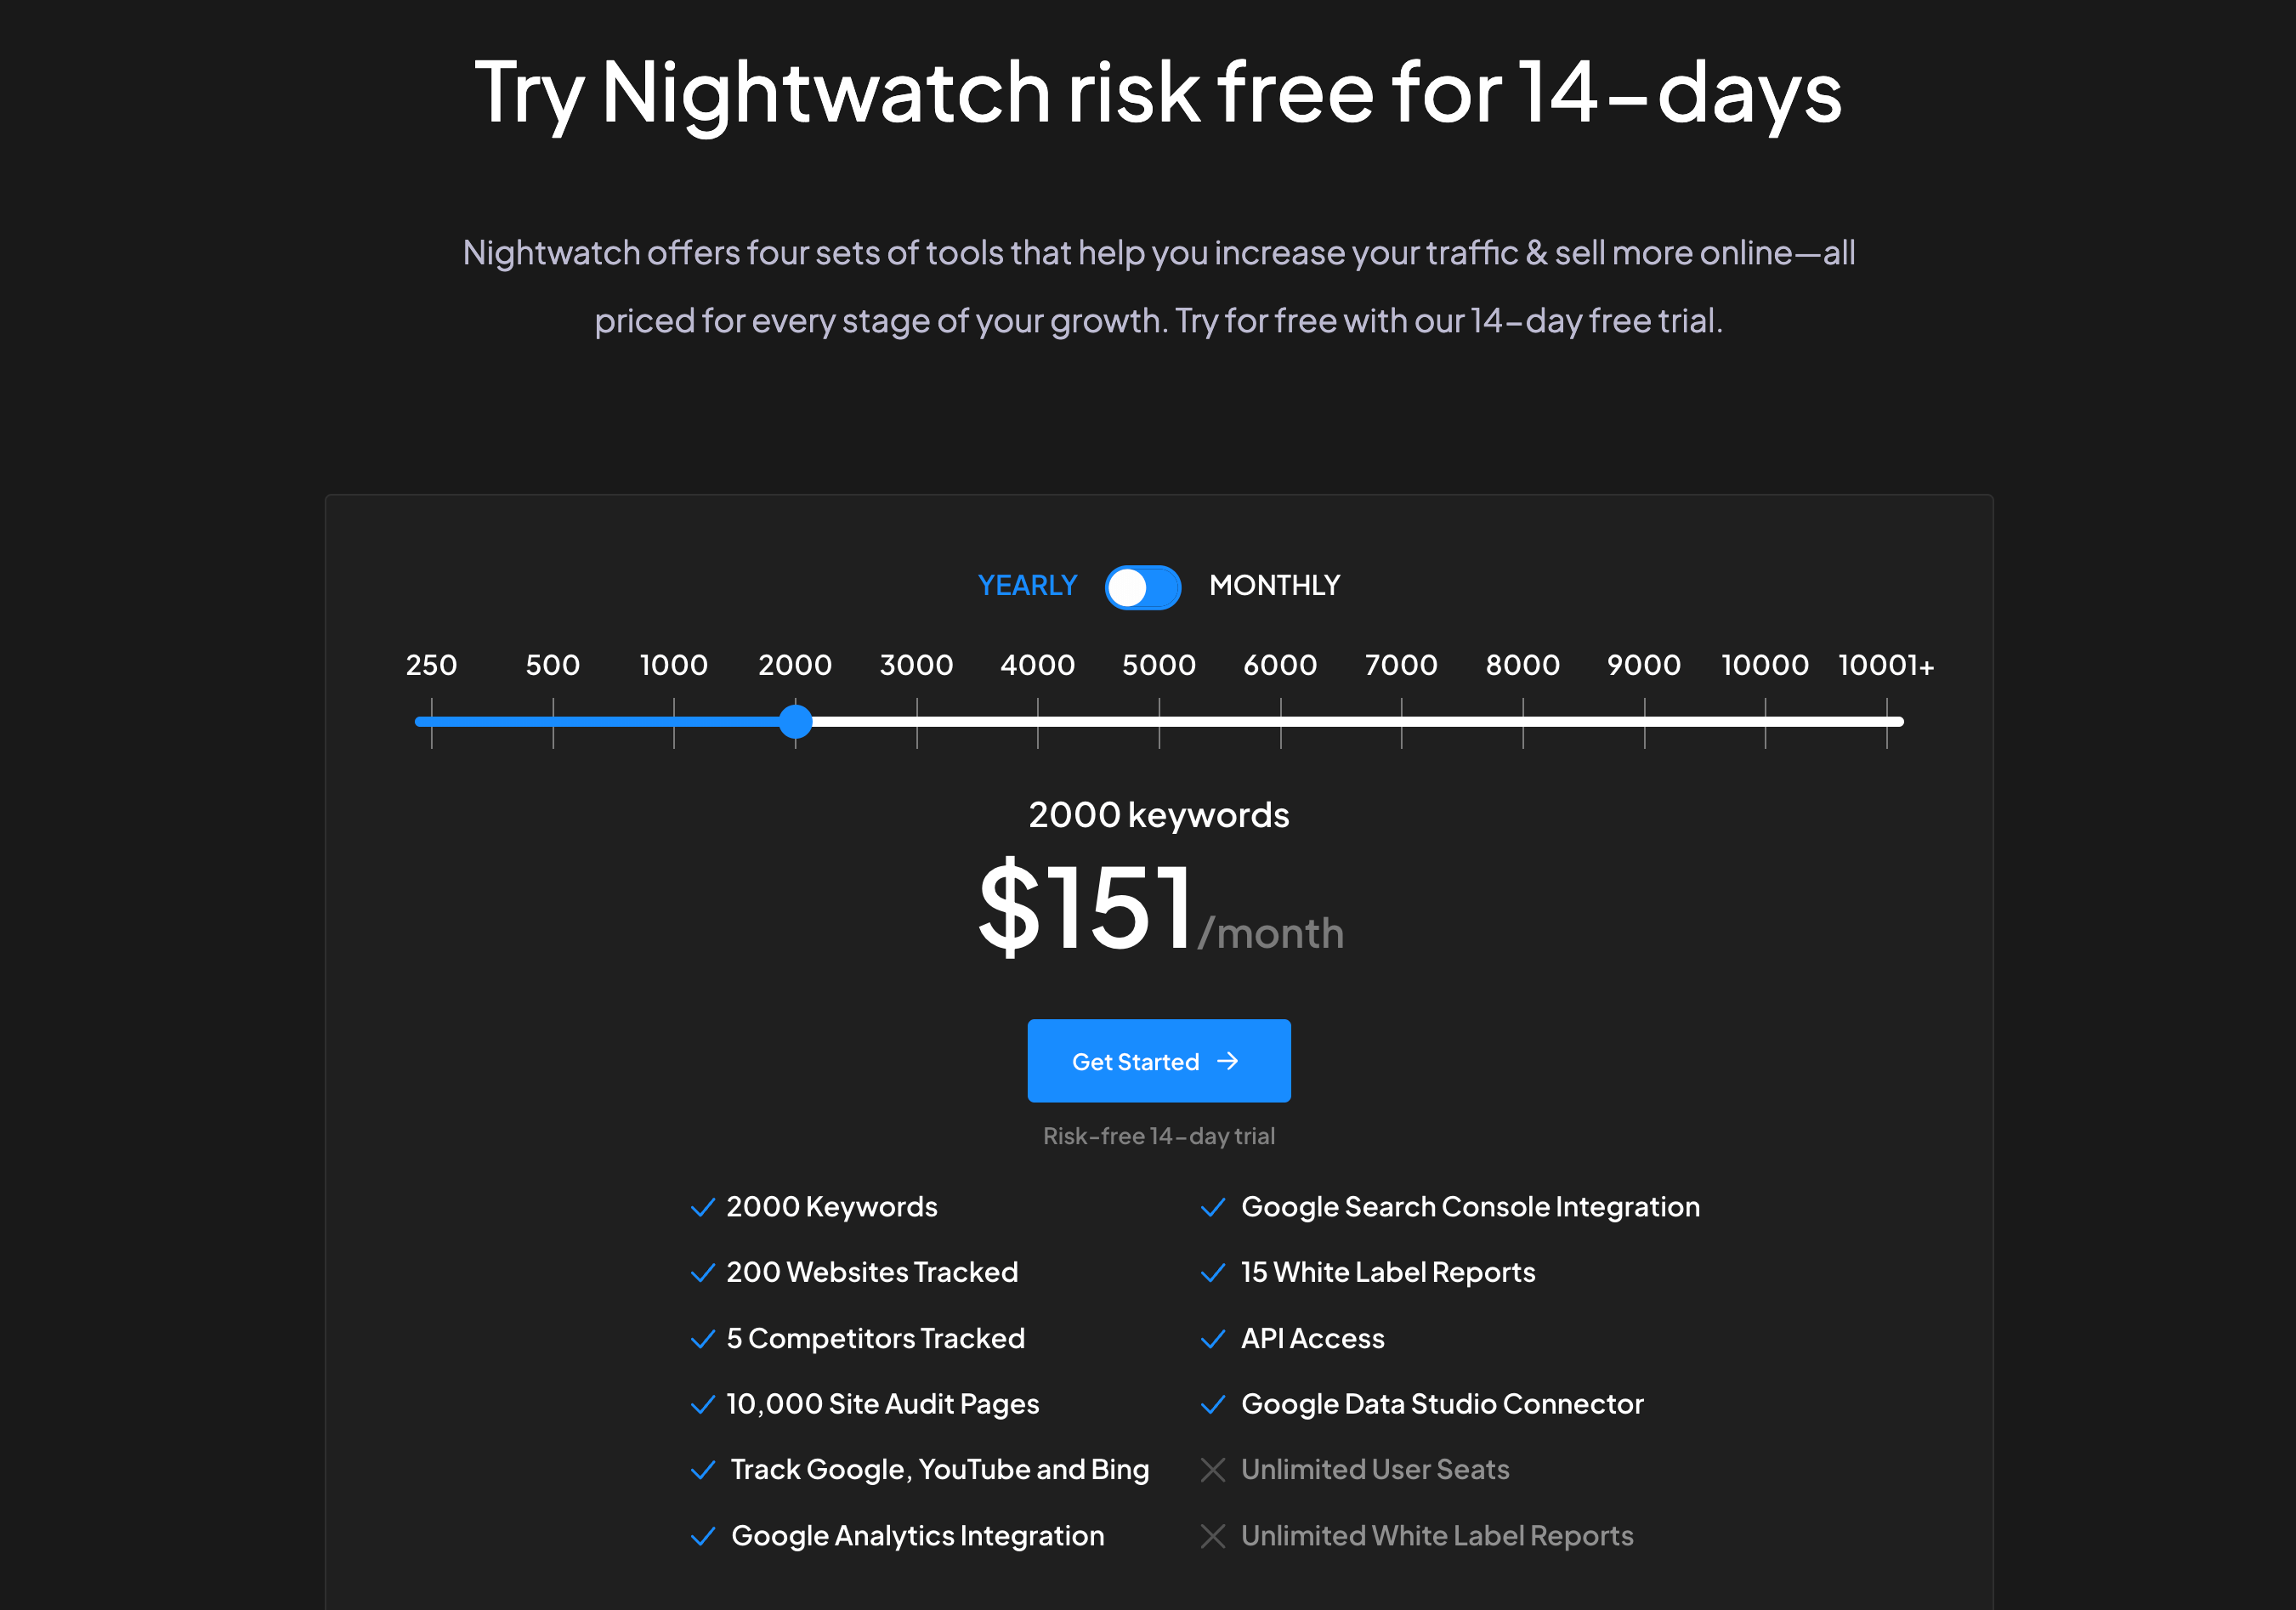 nightwatch price list marketing collateral example